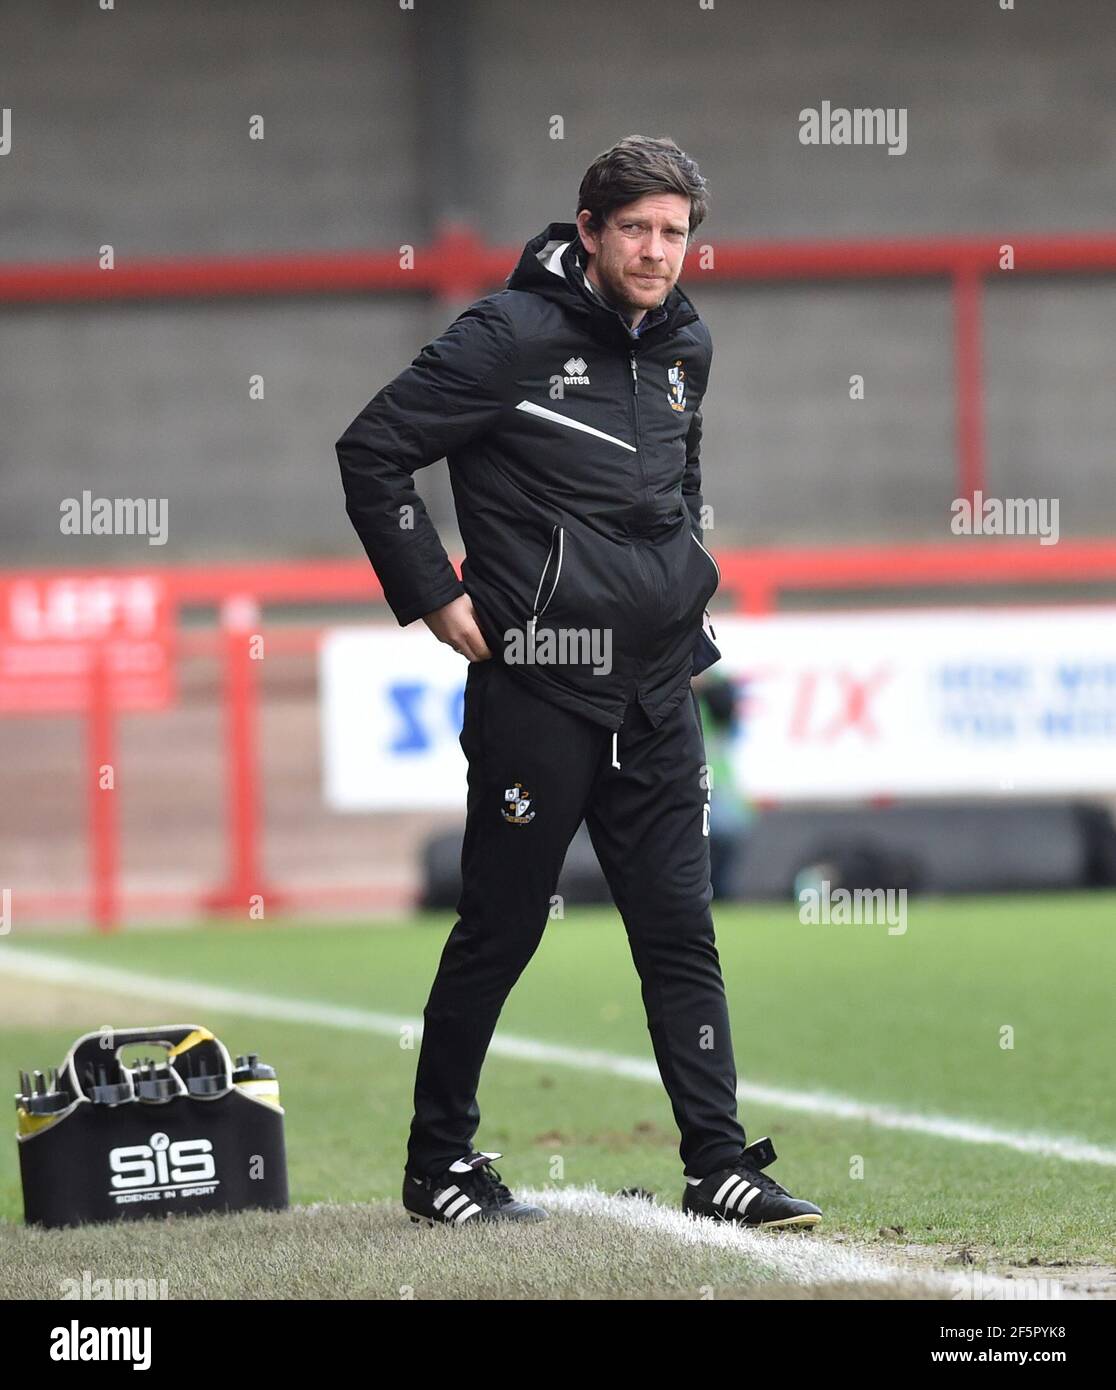 Port Vale manager Darrell Clarke during the Sky Bet League Two match between Crawley Town and Port Vale at the People's Pension Stadium   , Crawley ,  UK - 27th March 2021 - Editorial use only. No merchandising. For Football images FA and Premier League restrictions apply inc. no internet/mobile usage without FAPL license - for details contact Football Dataco Stock Photo